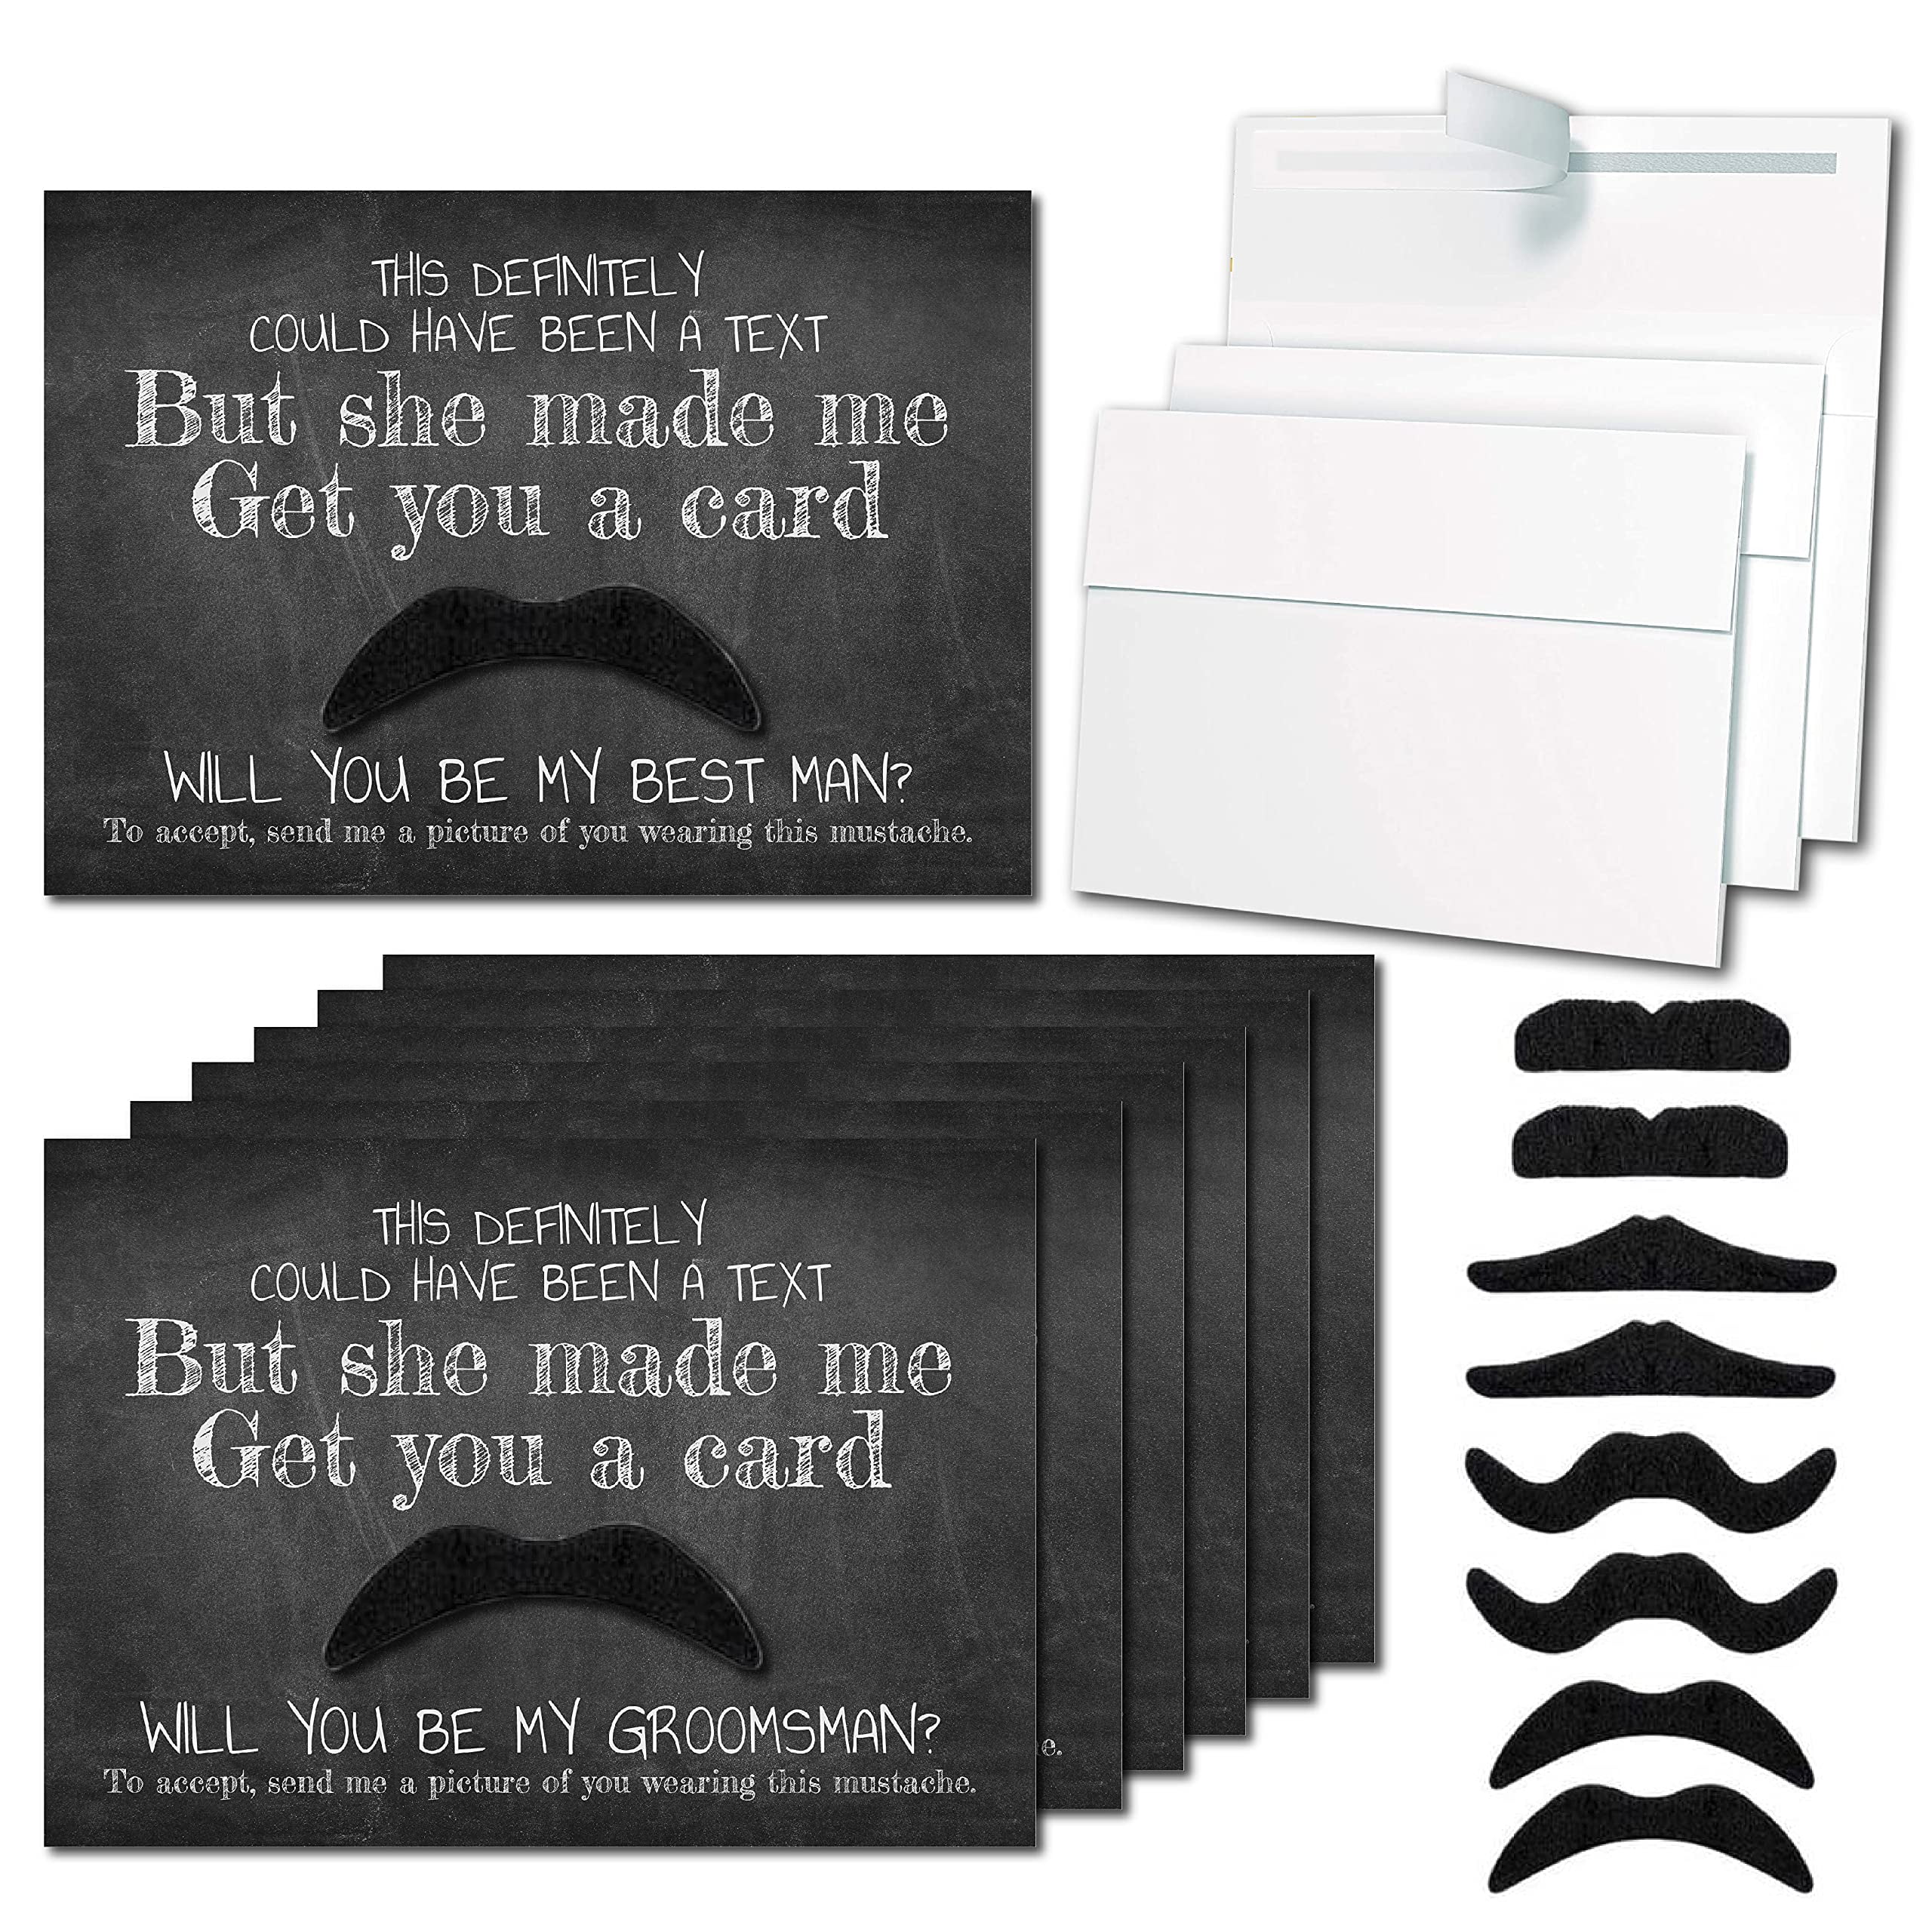 Groomsmen Proposal 5x7 Cards with Envelopes and Fake Mustaches Set (7  Groomsmen Cards + 1 Best Man Card), Groomsman Proposal Gifts, Funny  Groomsmen Proposal Gifts 